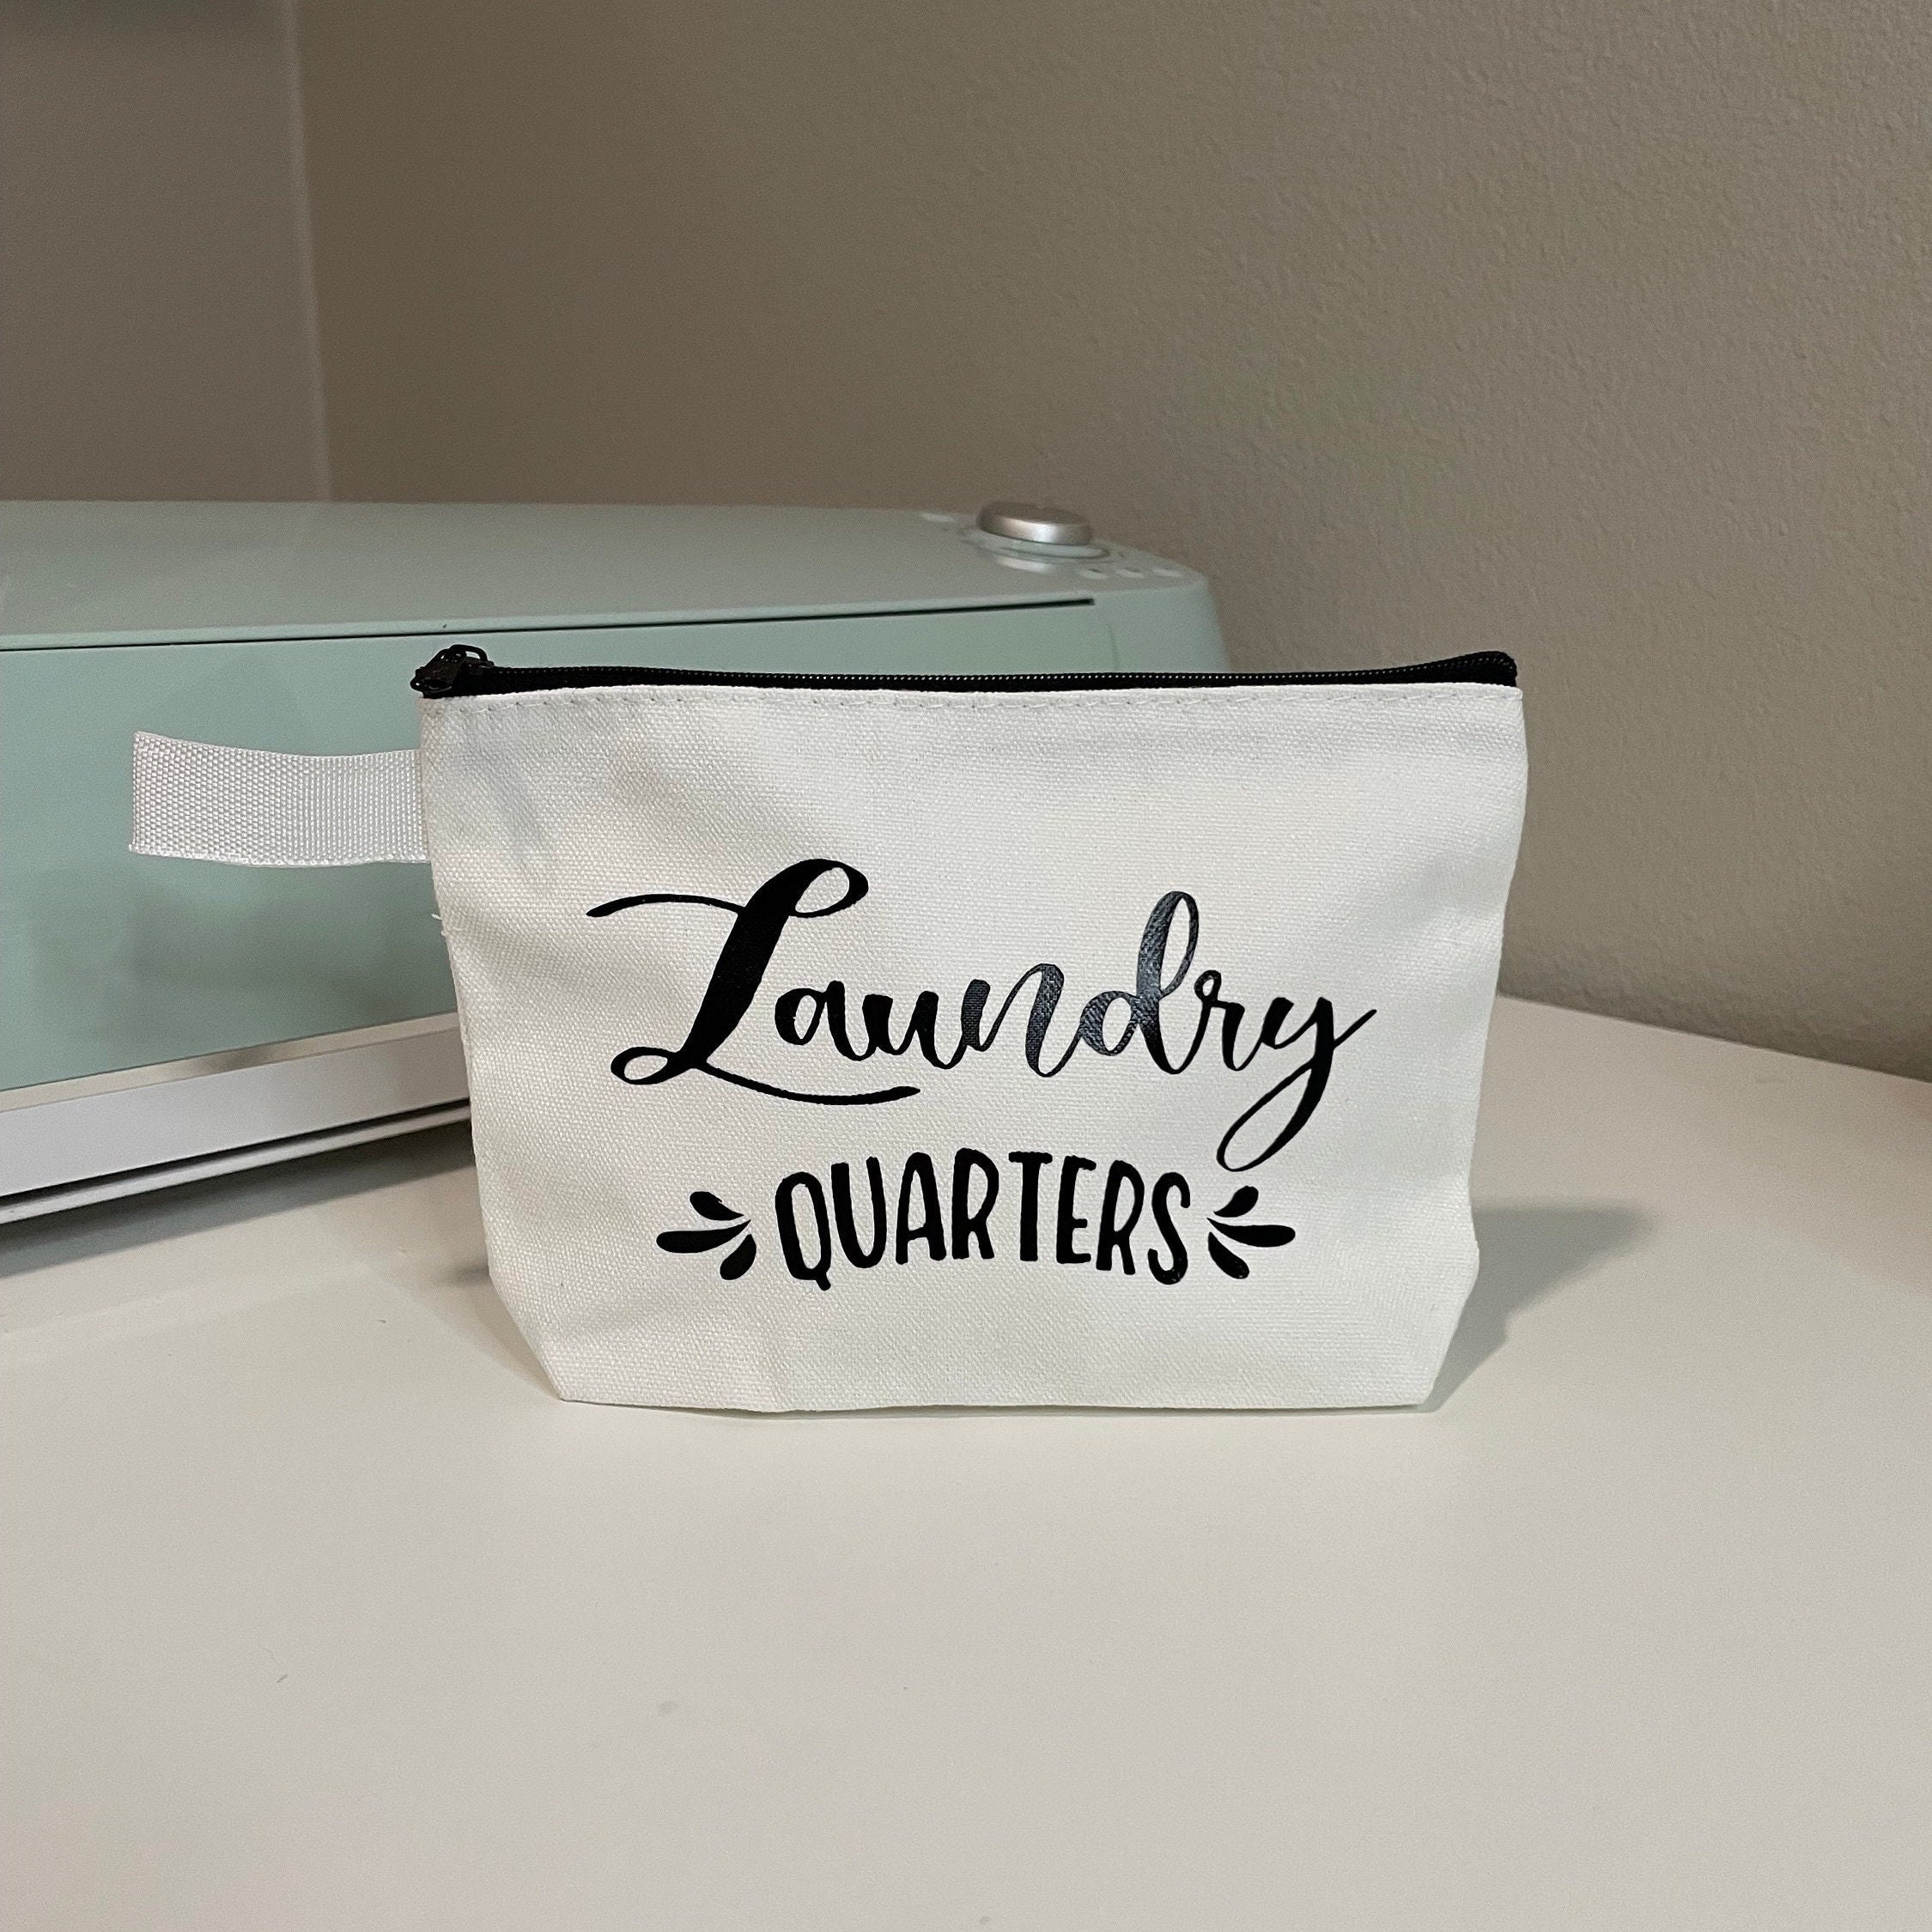 Laundry Quarters Bag, College Dorm Necessity, Laundry, Apartment Laundry,  Laundromat Coin Purse, Detergent, Coin Operated Laundry Machine 